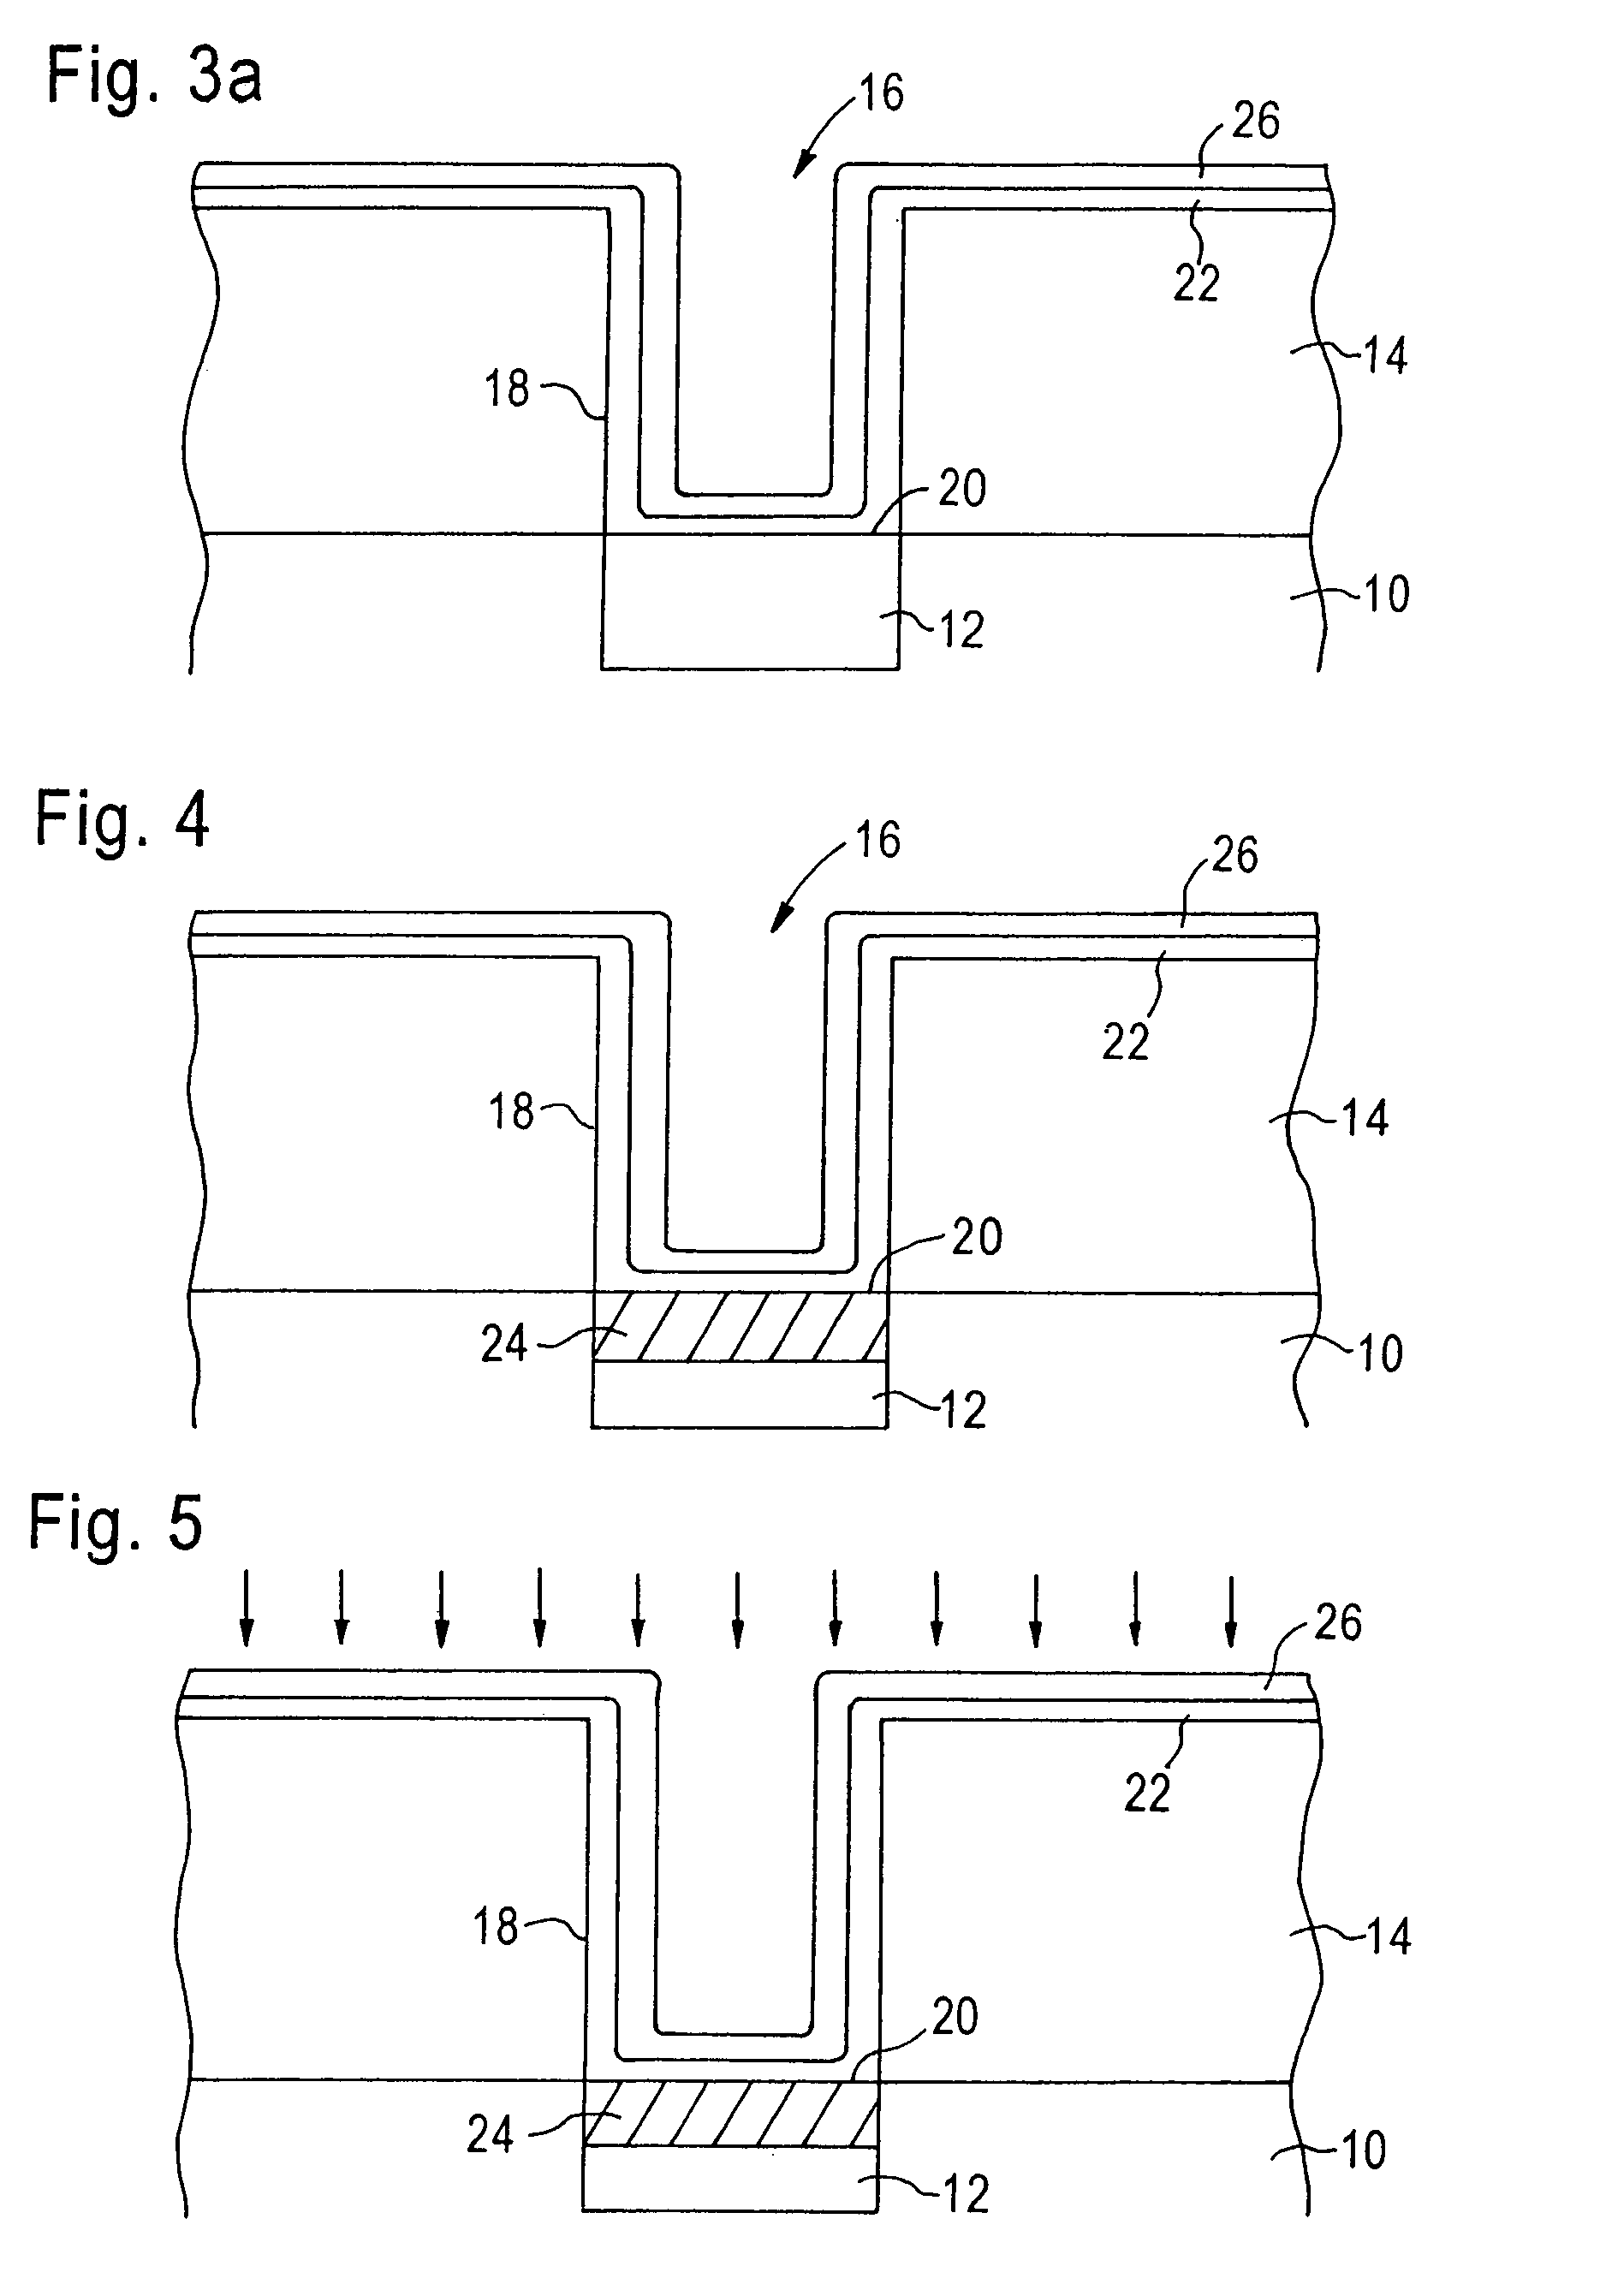 Method of forming a contact in a semiconductor device with formation of silicide prior to plasma treatment